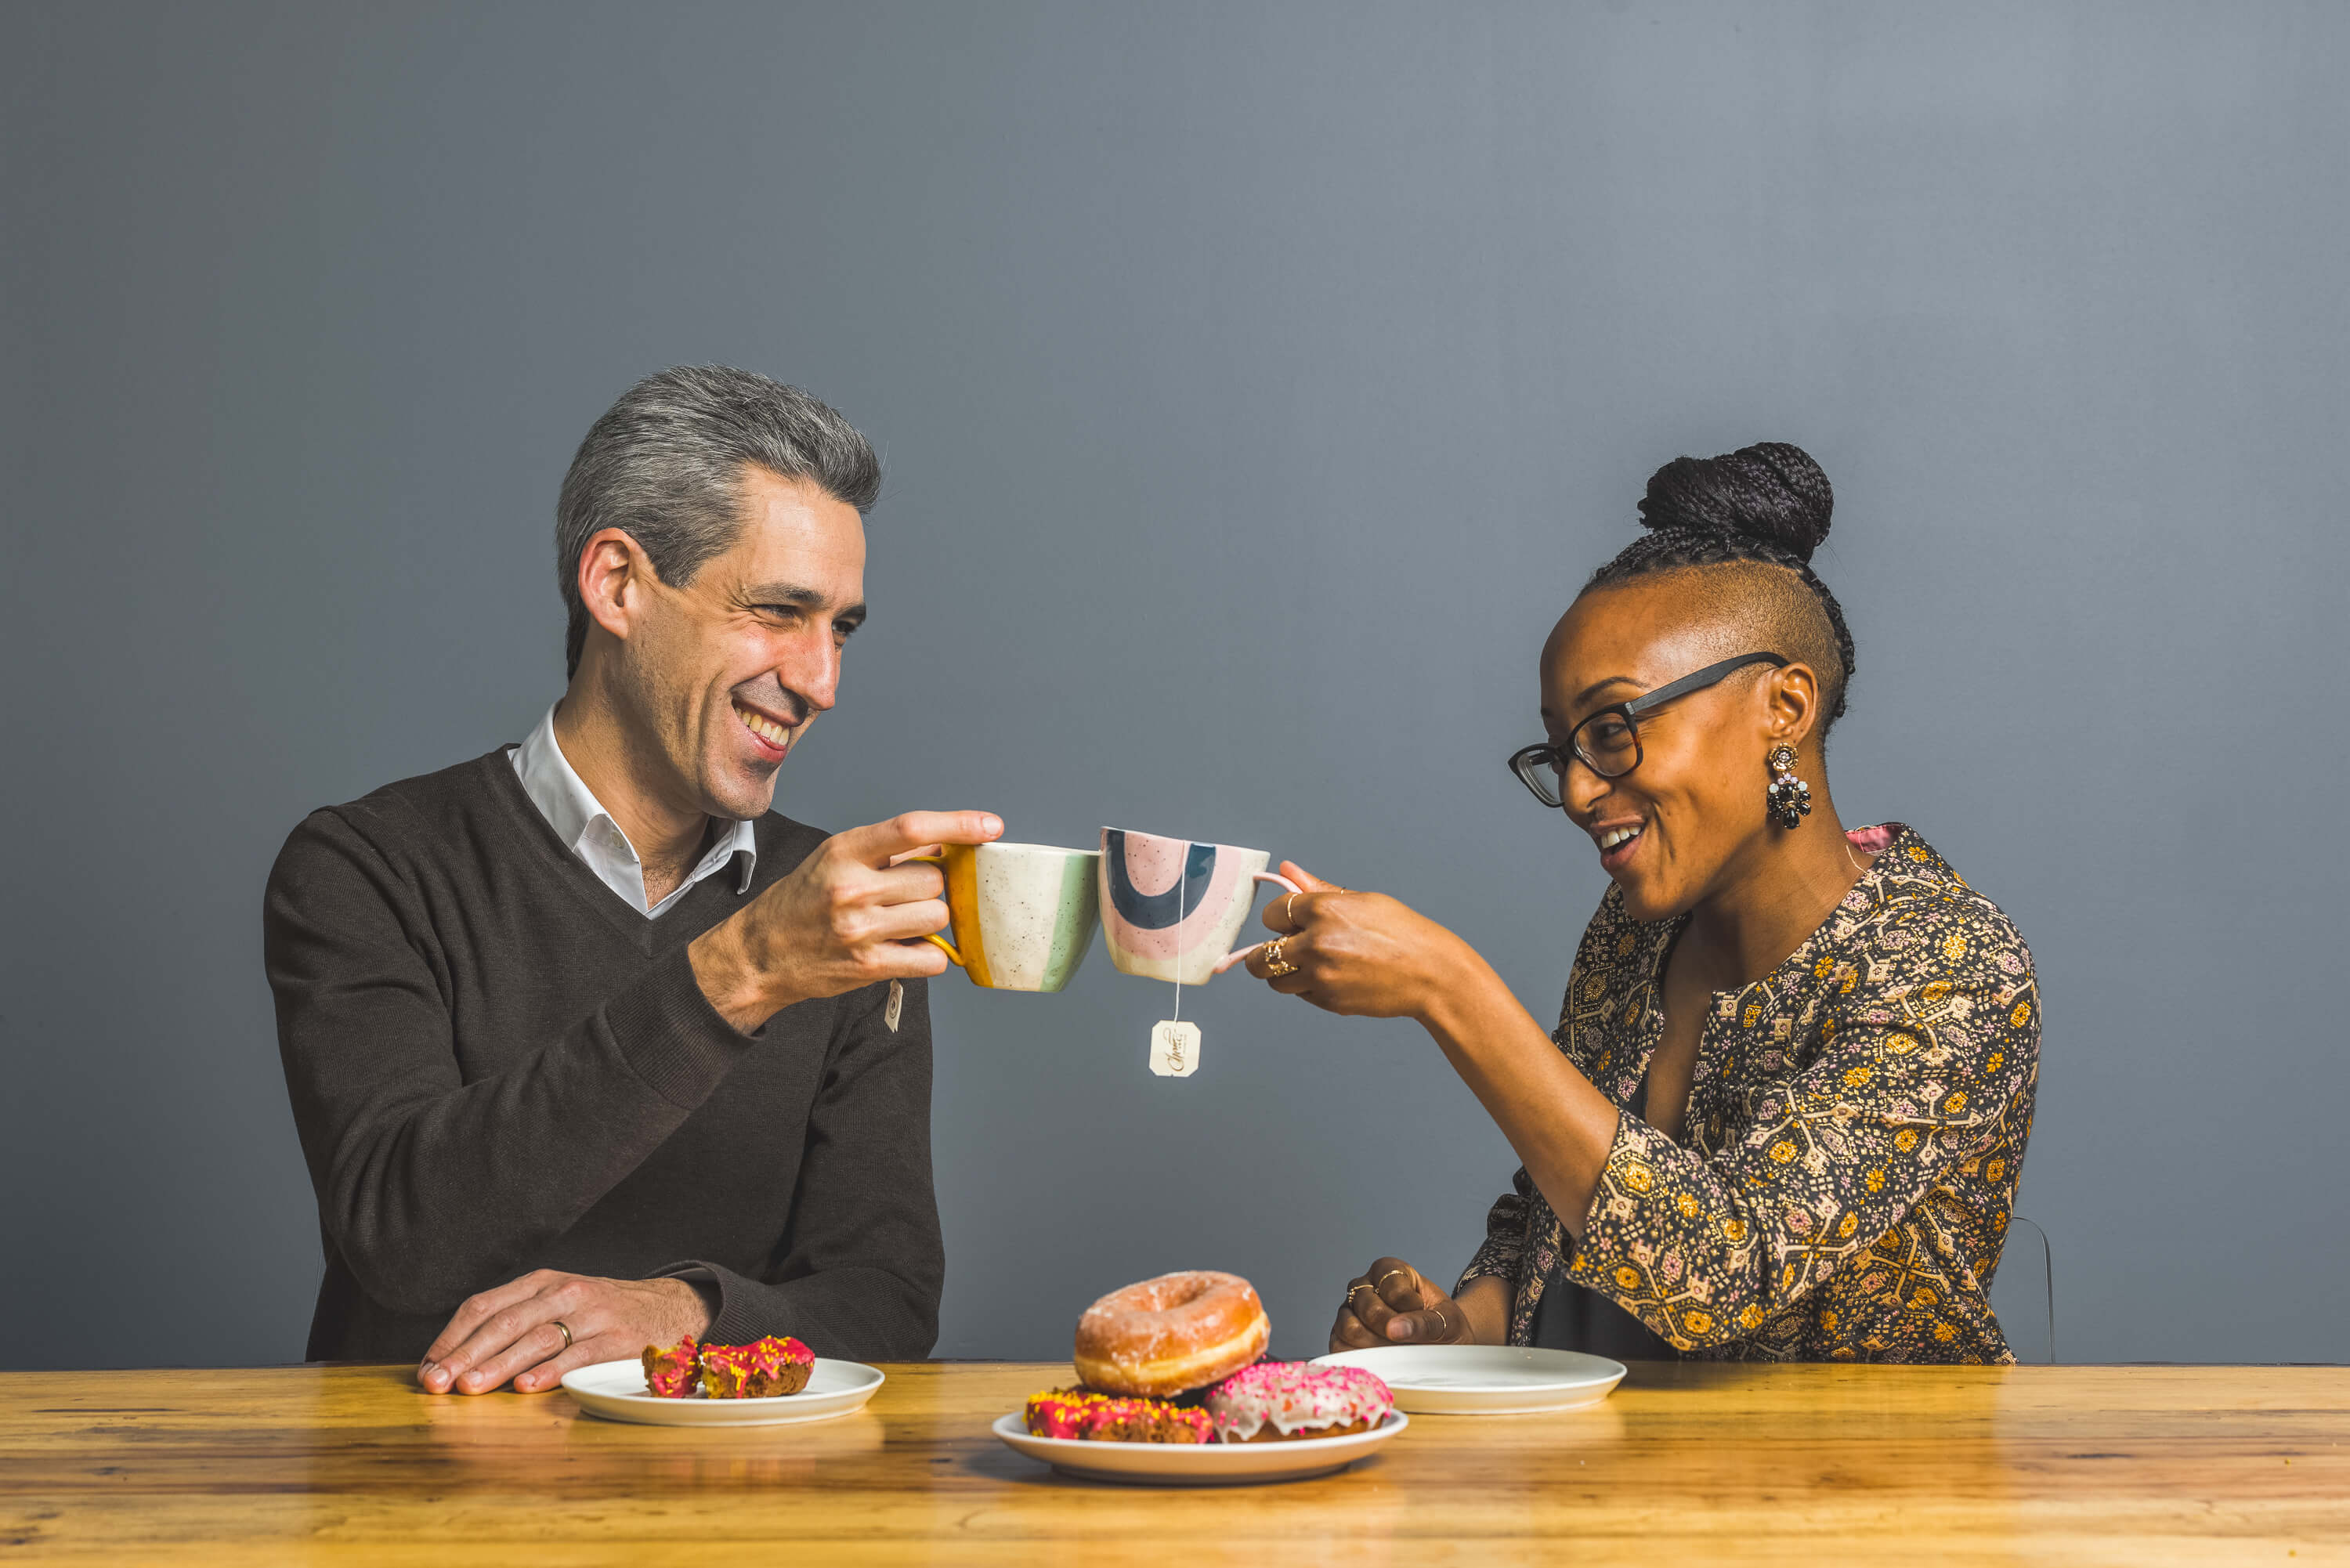 Glenance Green and Daniel Biss sit down and share their opinions over coffee.